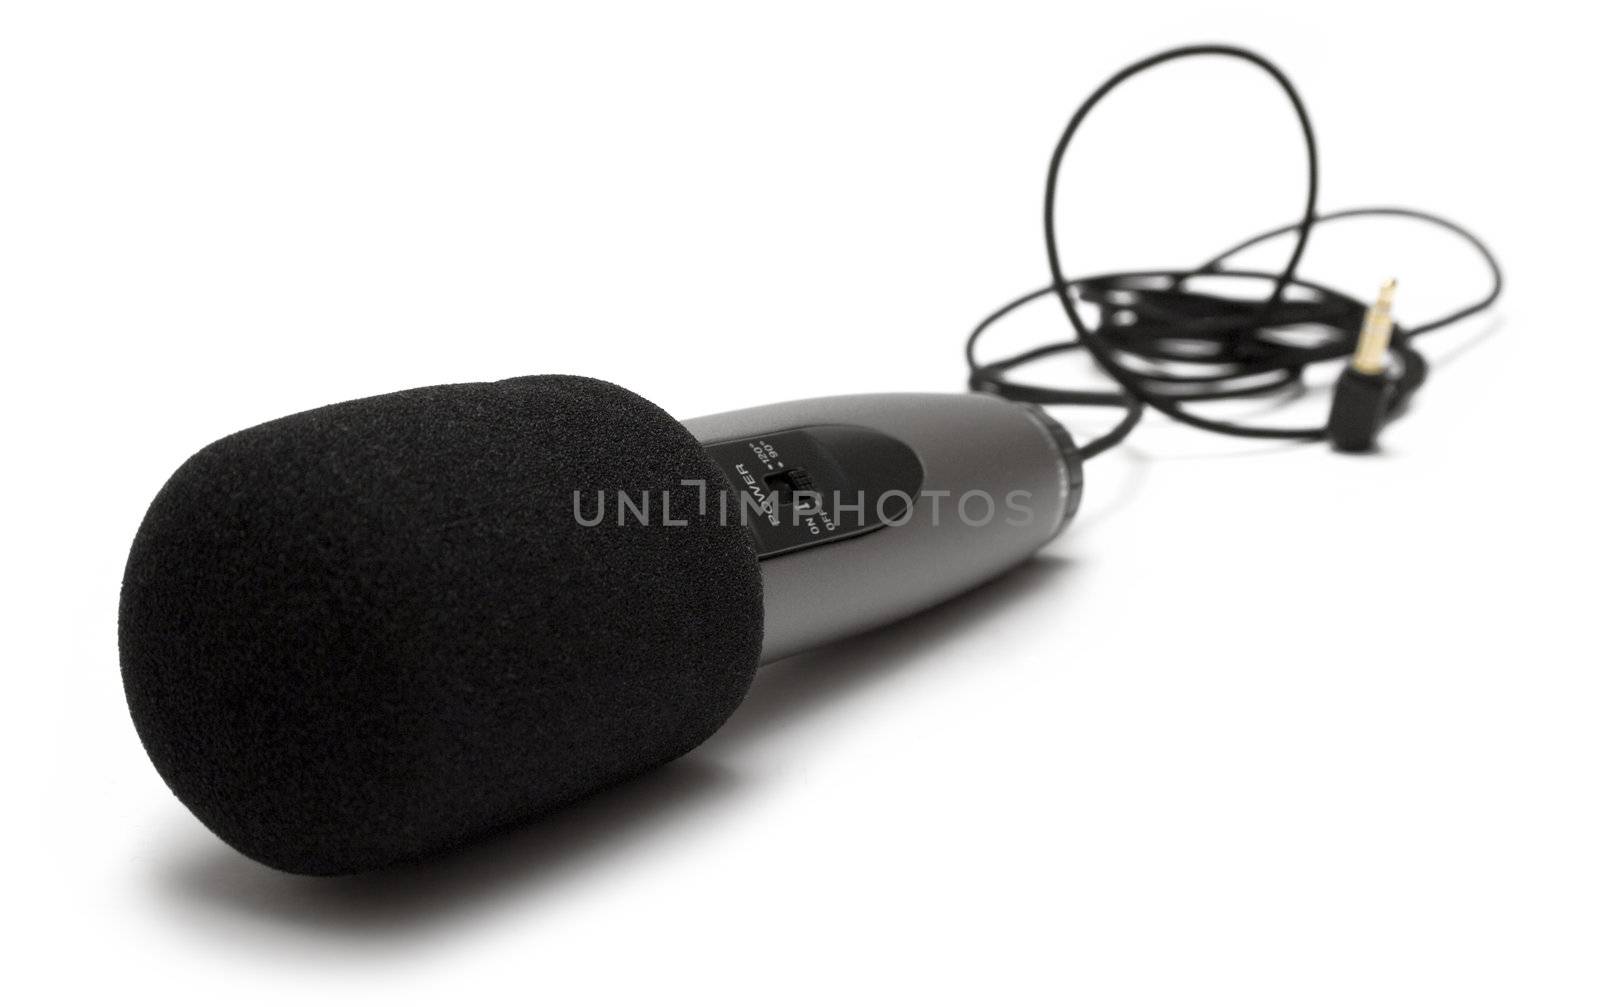 Black microphone isolated on a white background. Shallow depth of field.